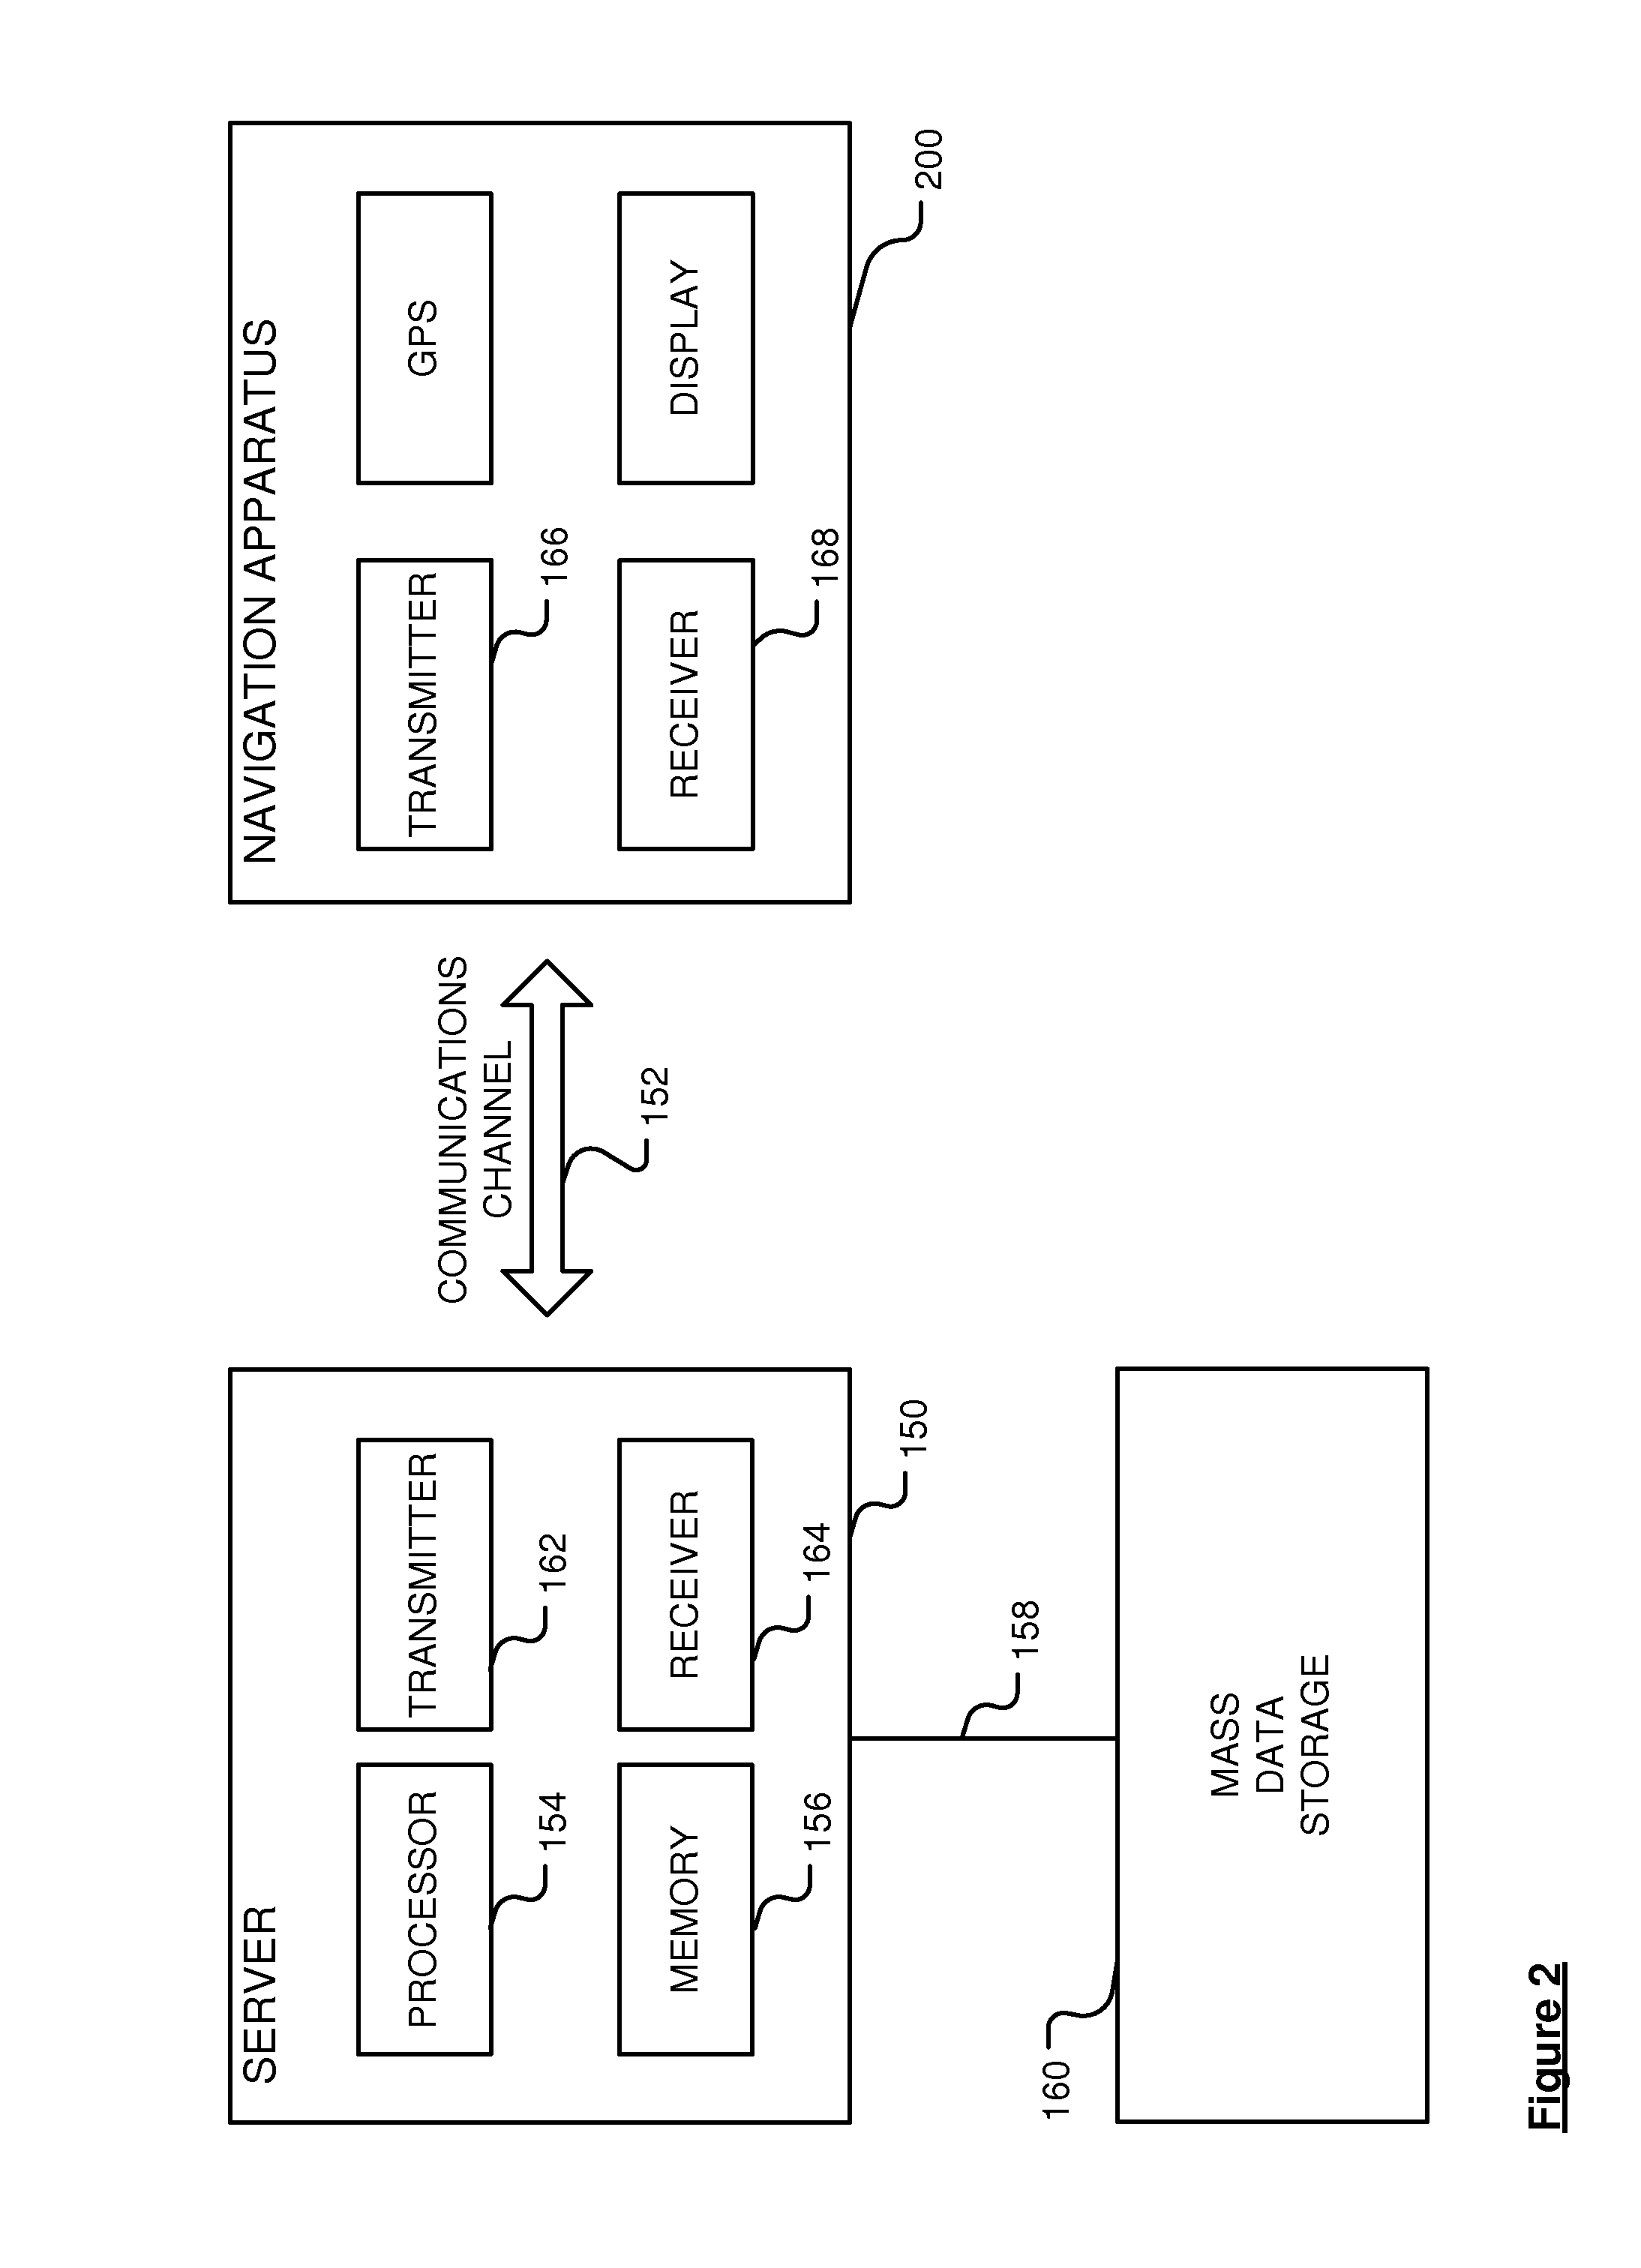 Data enrichment apparatus and method of determining temporal access information